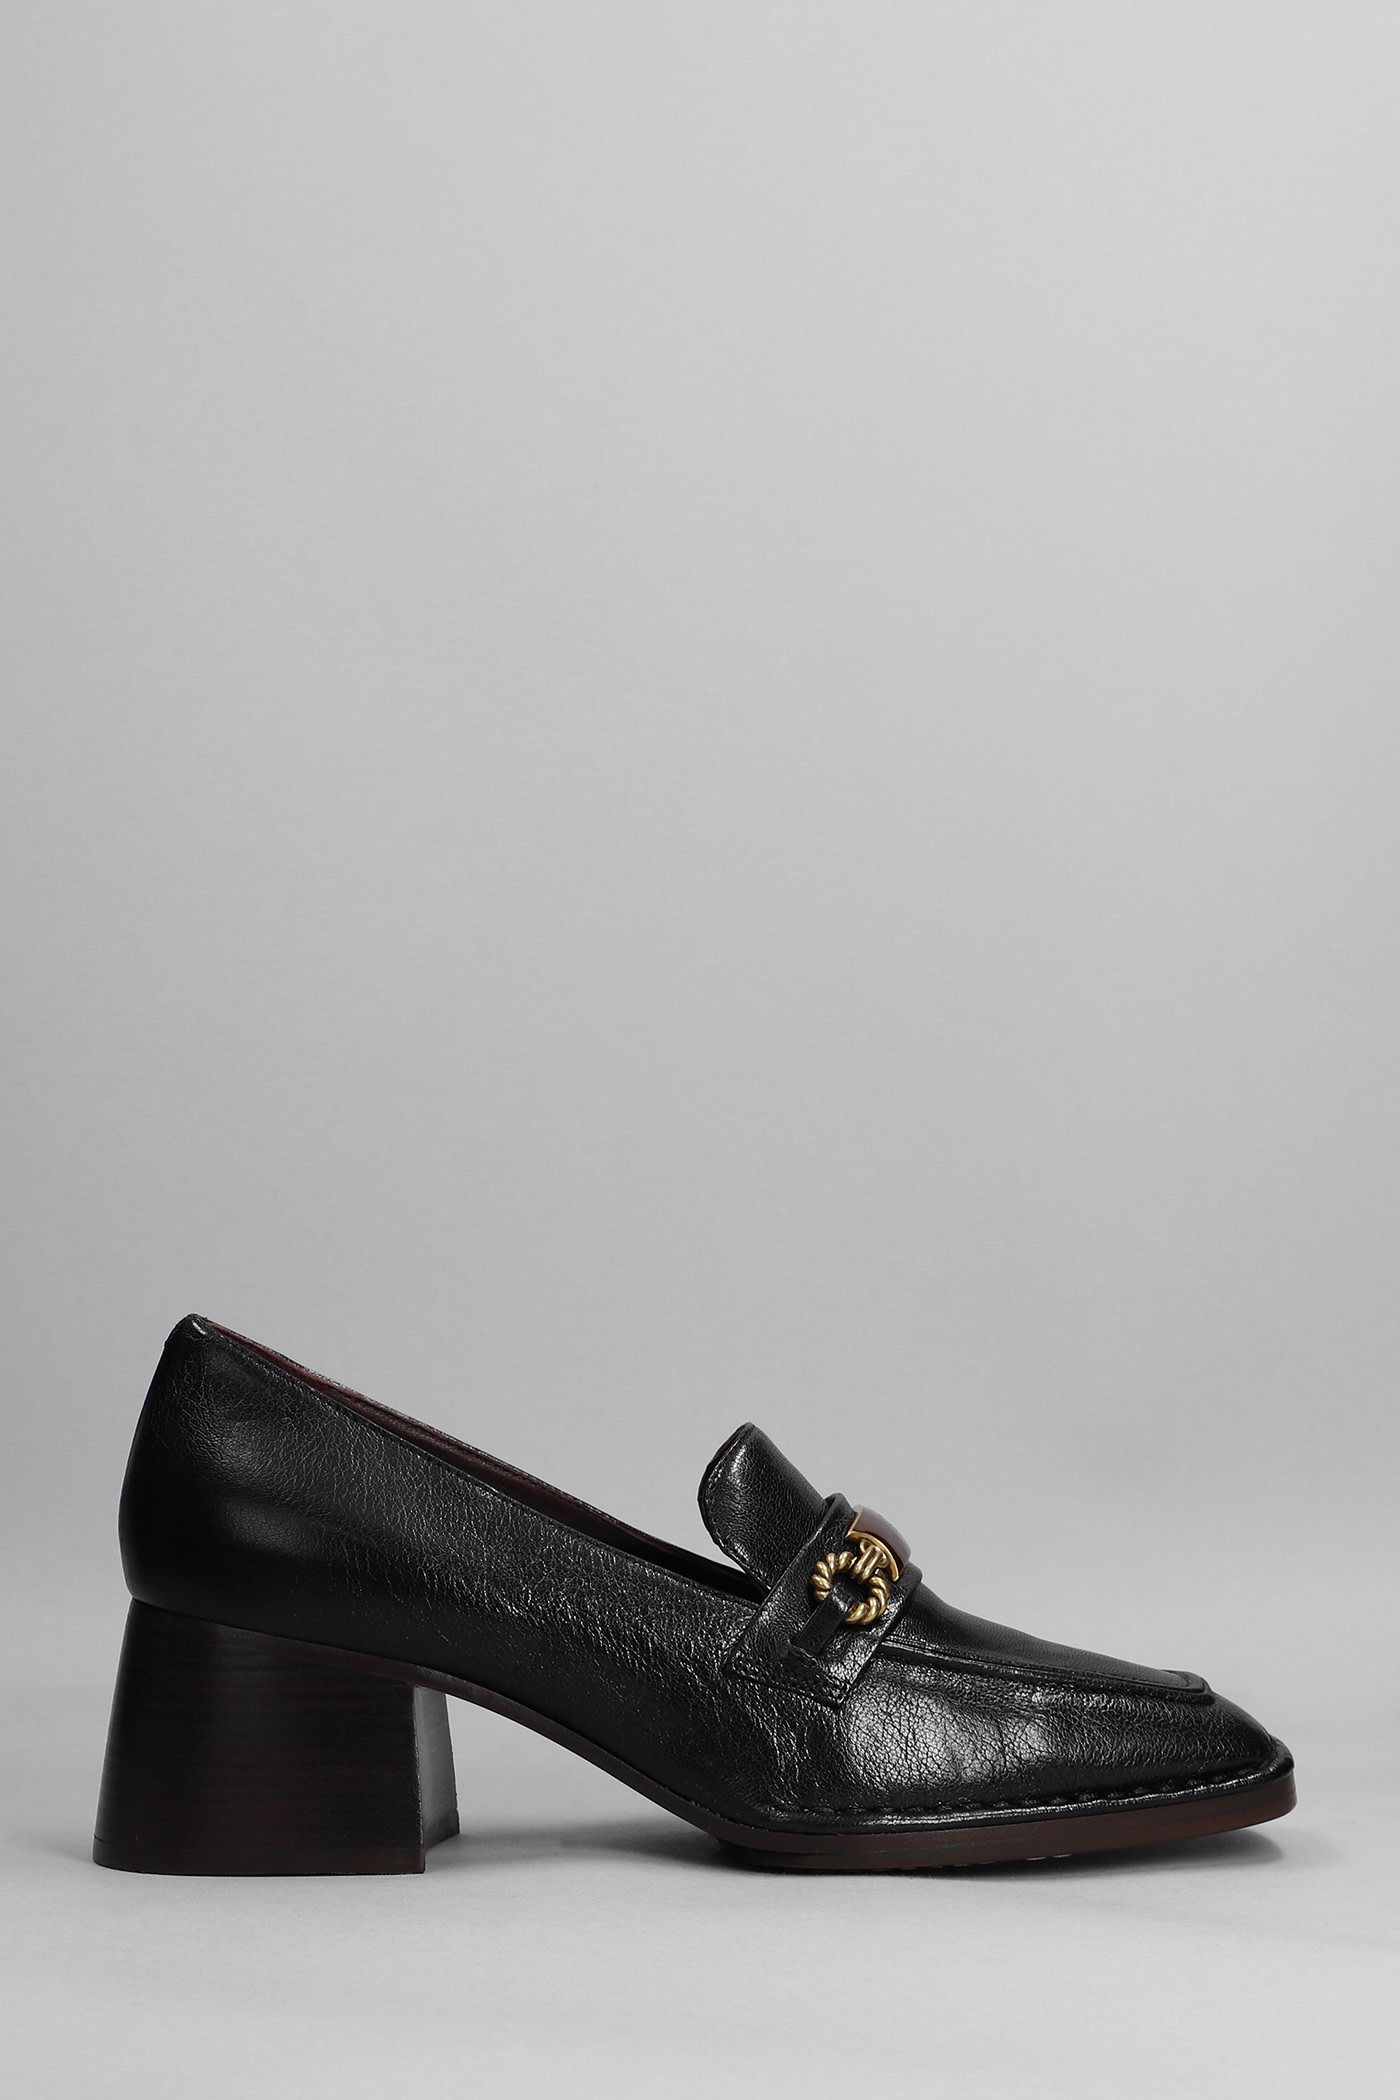 Tory Burch Perrine 55mm Loafers In Black Leather